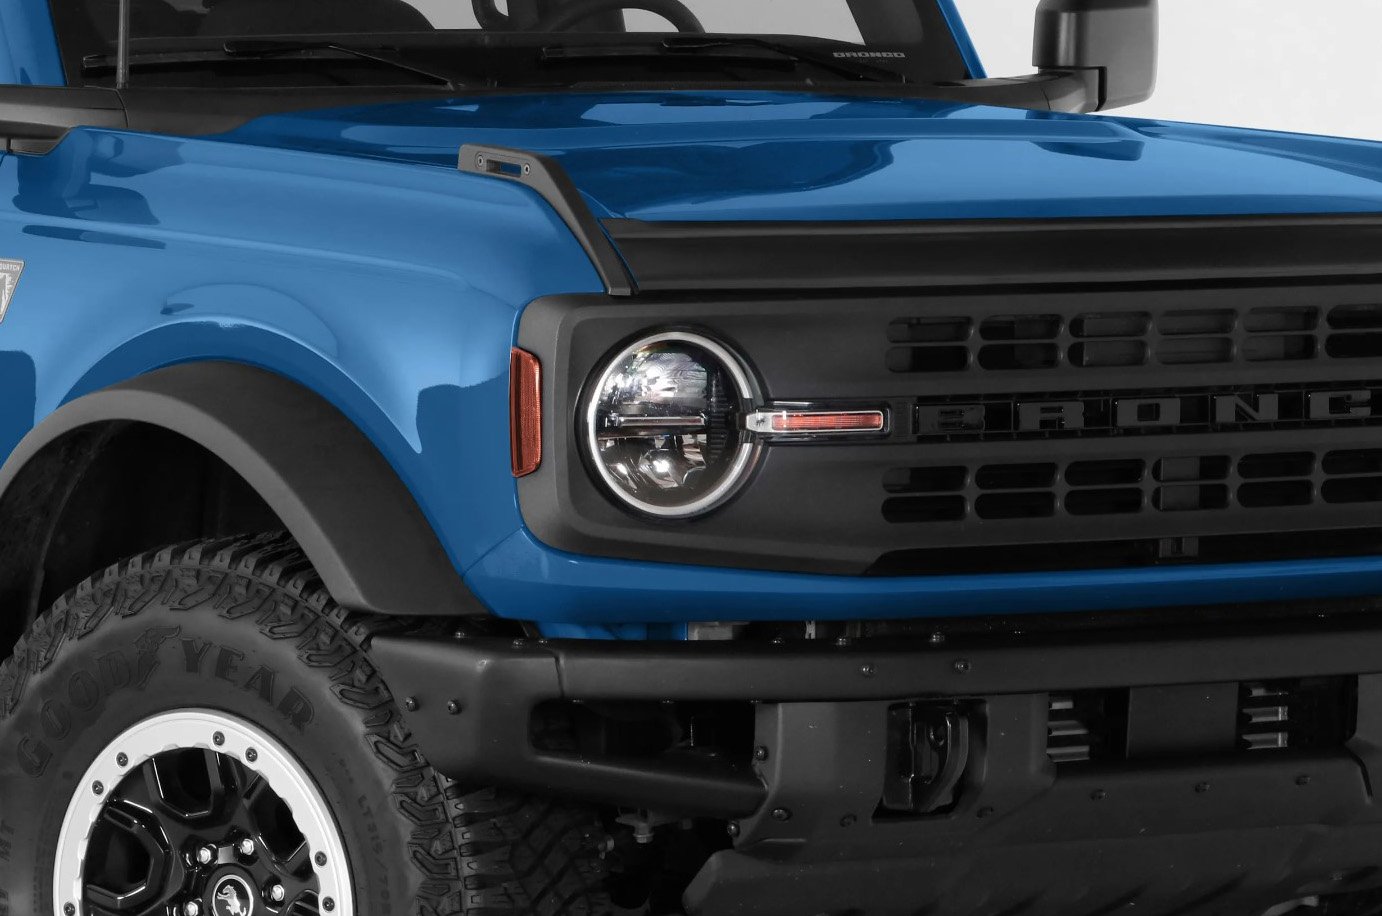 Clear Headlight Cover Kit Fits Gen 6 Ford Bronco [non-LED]